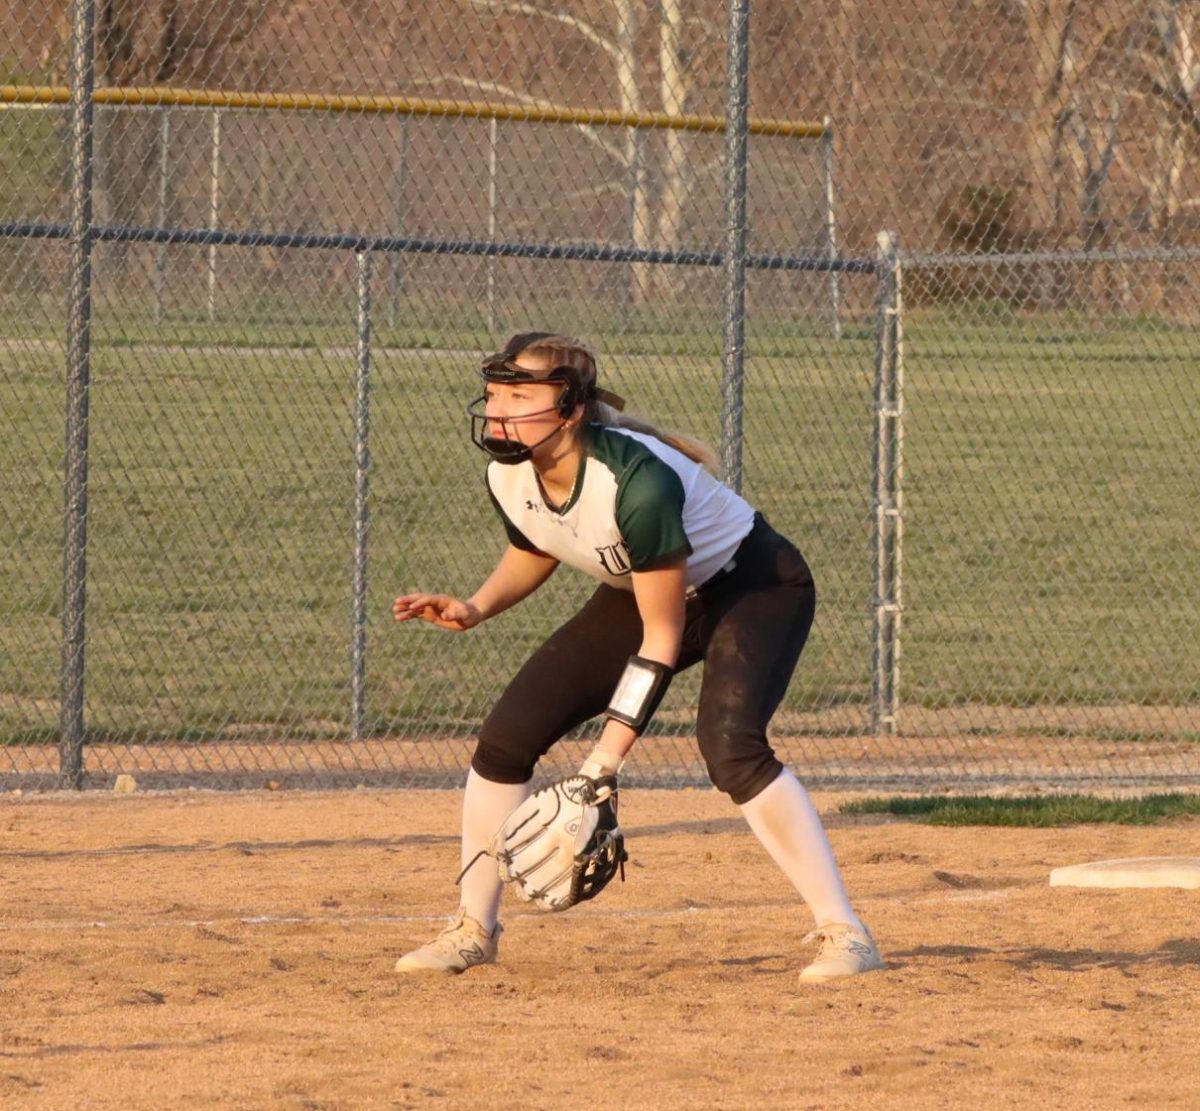 Freshman Madyson Reimund takes infield as a third baseman for the Lady Cats versus Lone Jack.
